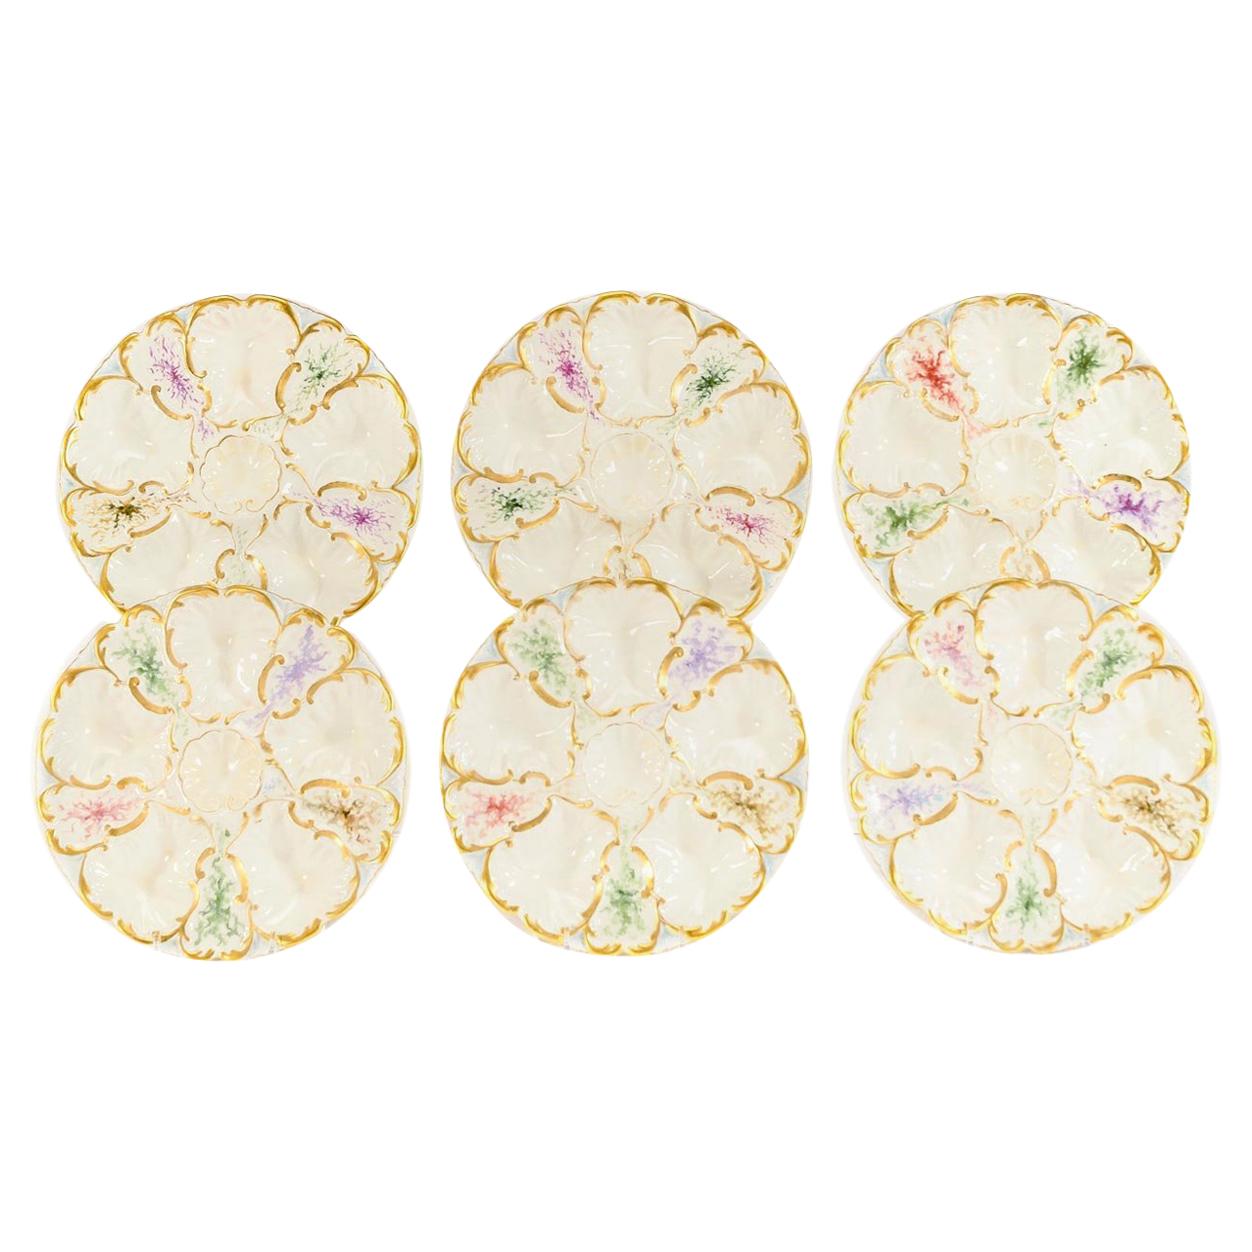 Set of 6 Limoges S & S Oyster Plates With Hand Painted Seaweed & Gilt Decoration